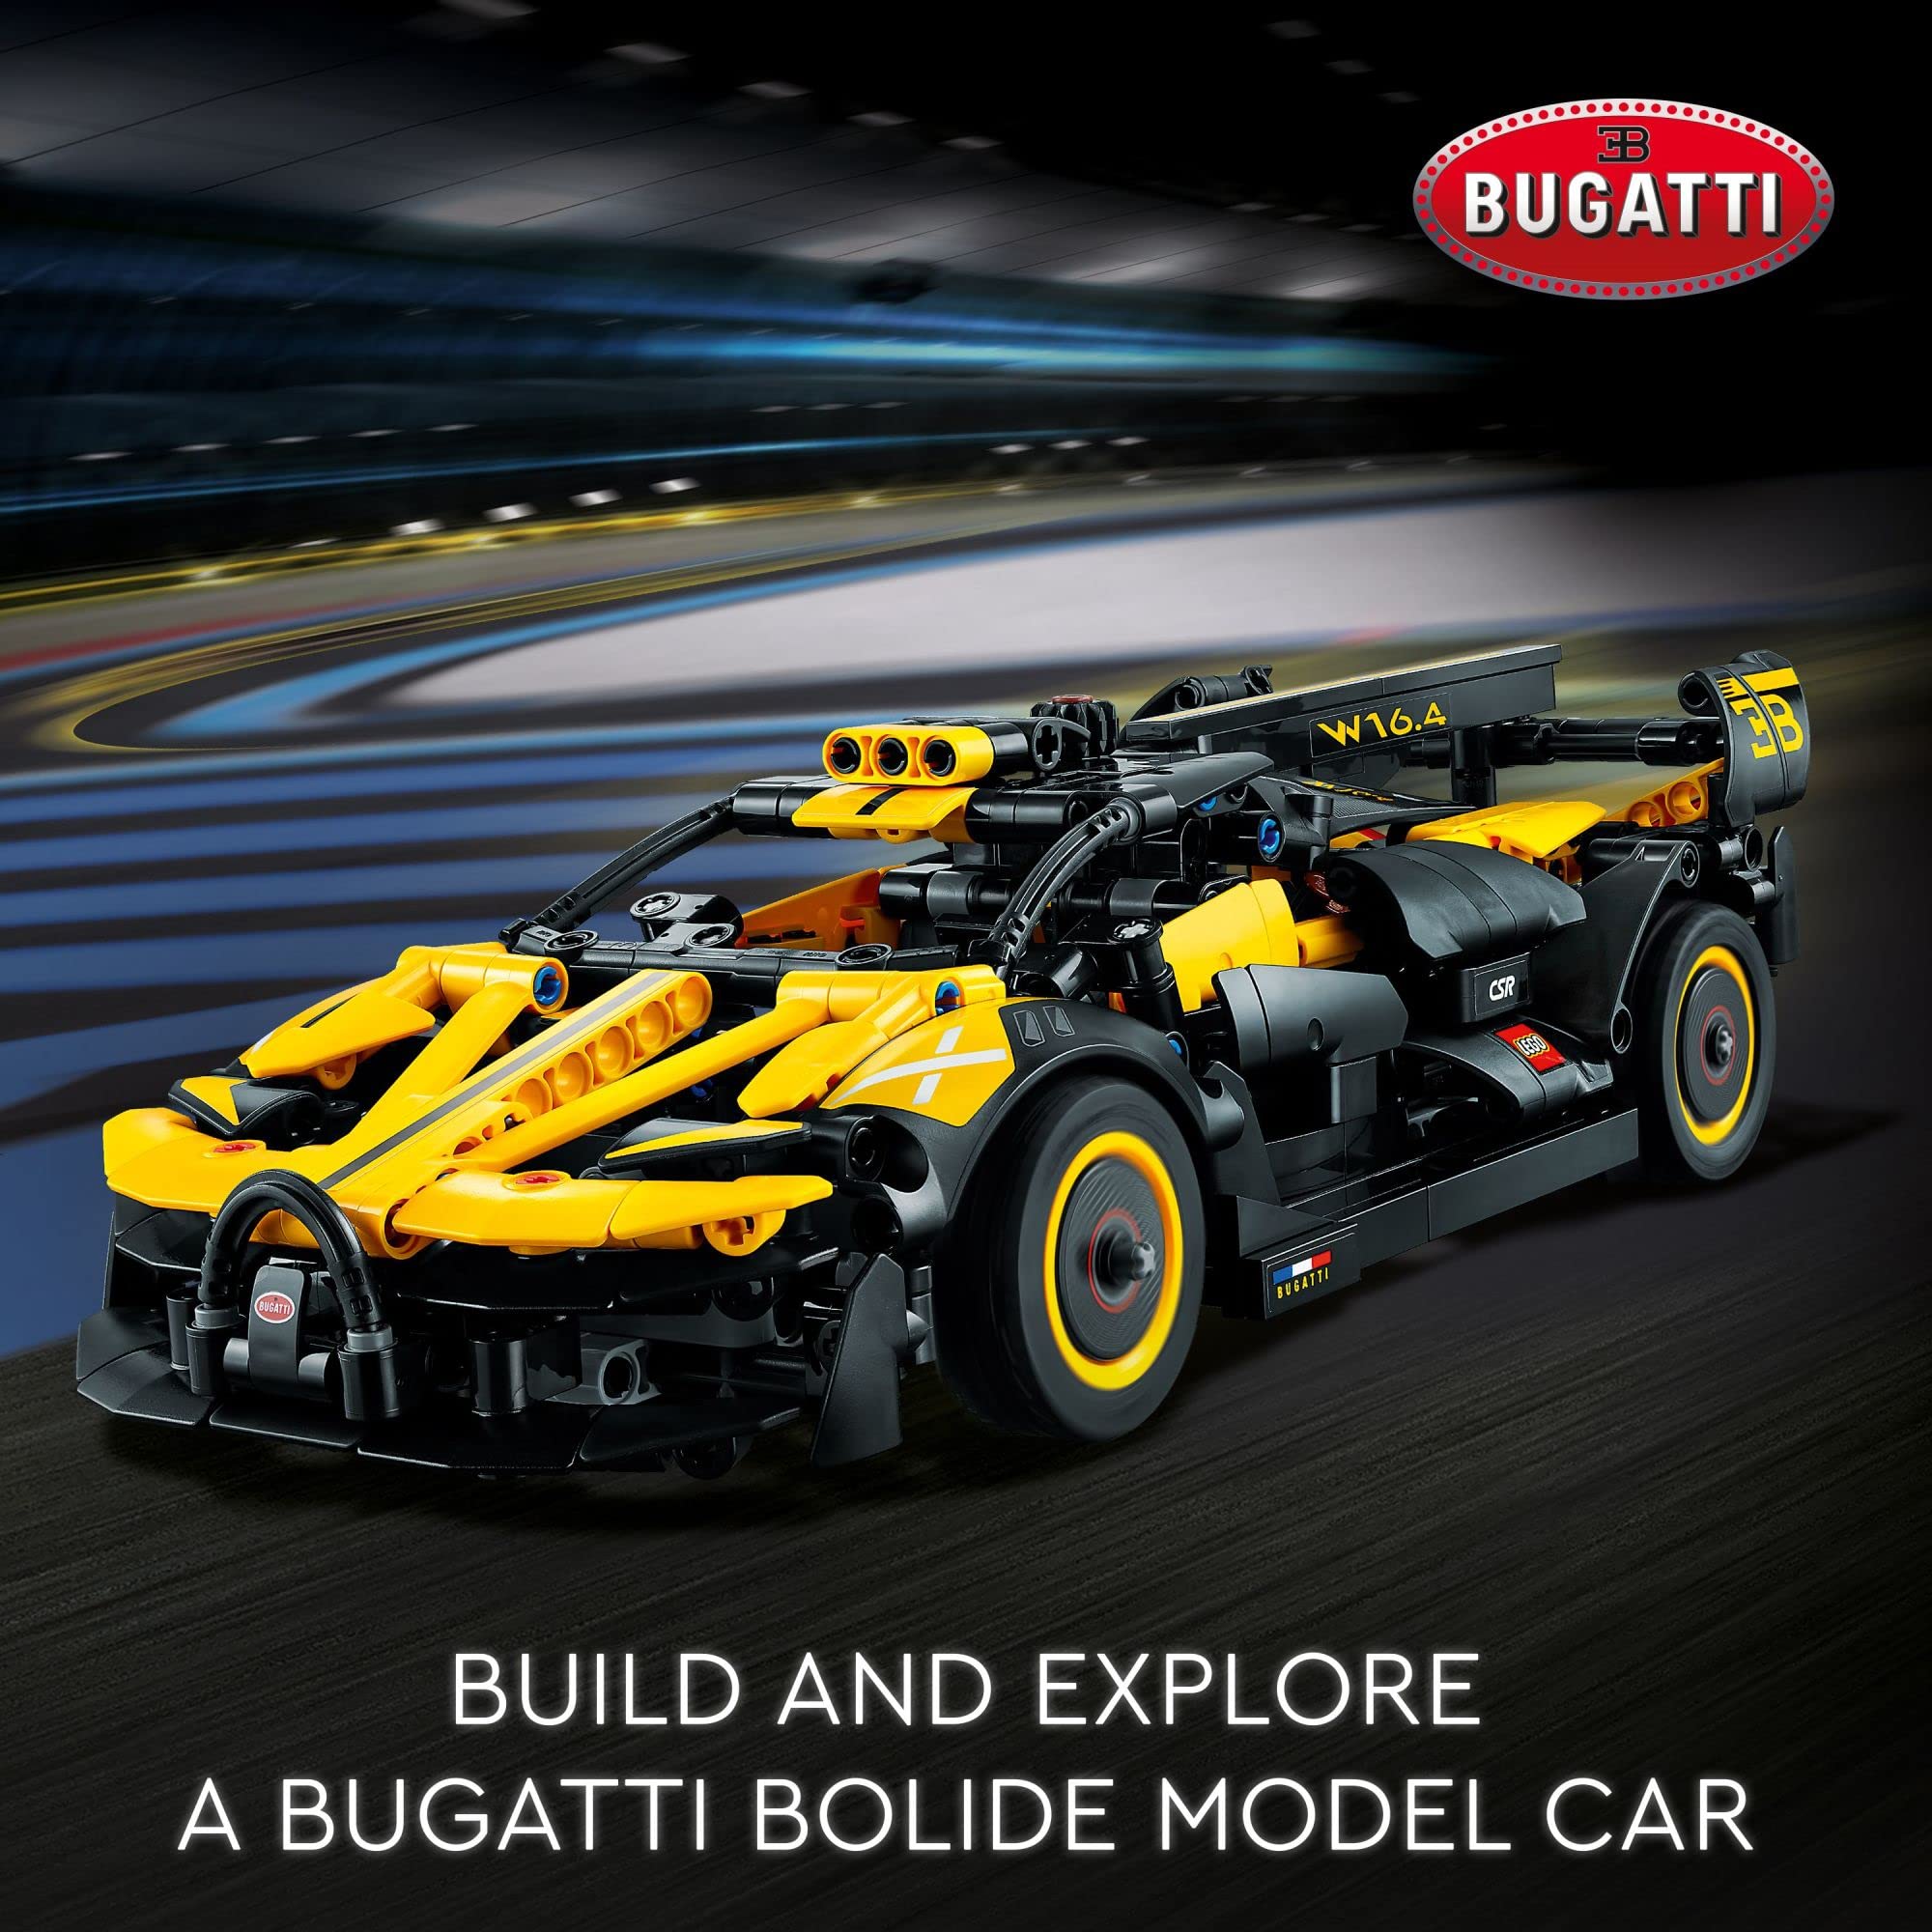 LEGO Technic Bugatti Bolide Racing Car Building Set 42151 - Model and Race Engineering Toy for Back to School, Collectible Sports Car Construction Kit for Boys, Girls, and Teen Builders Ages 9+